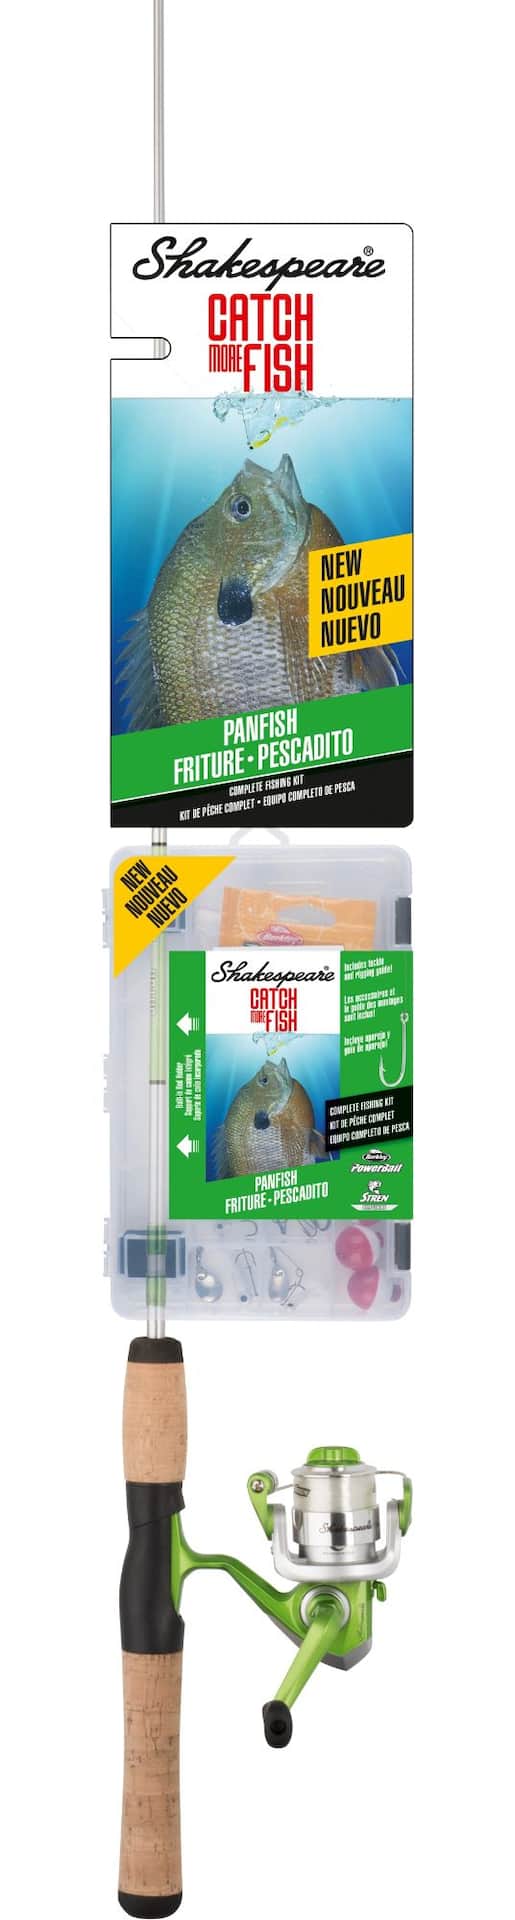 https://media-www.canadiantire.ca/product/playing/fishing/fishing-equipment/1782403/shakespeare-catch-more-fish-spinning-combo-panfish-03946867-2f8c-420f-bfab-61b63f1279f9-jpgrendition.jpg